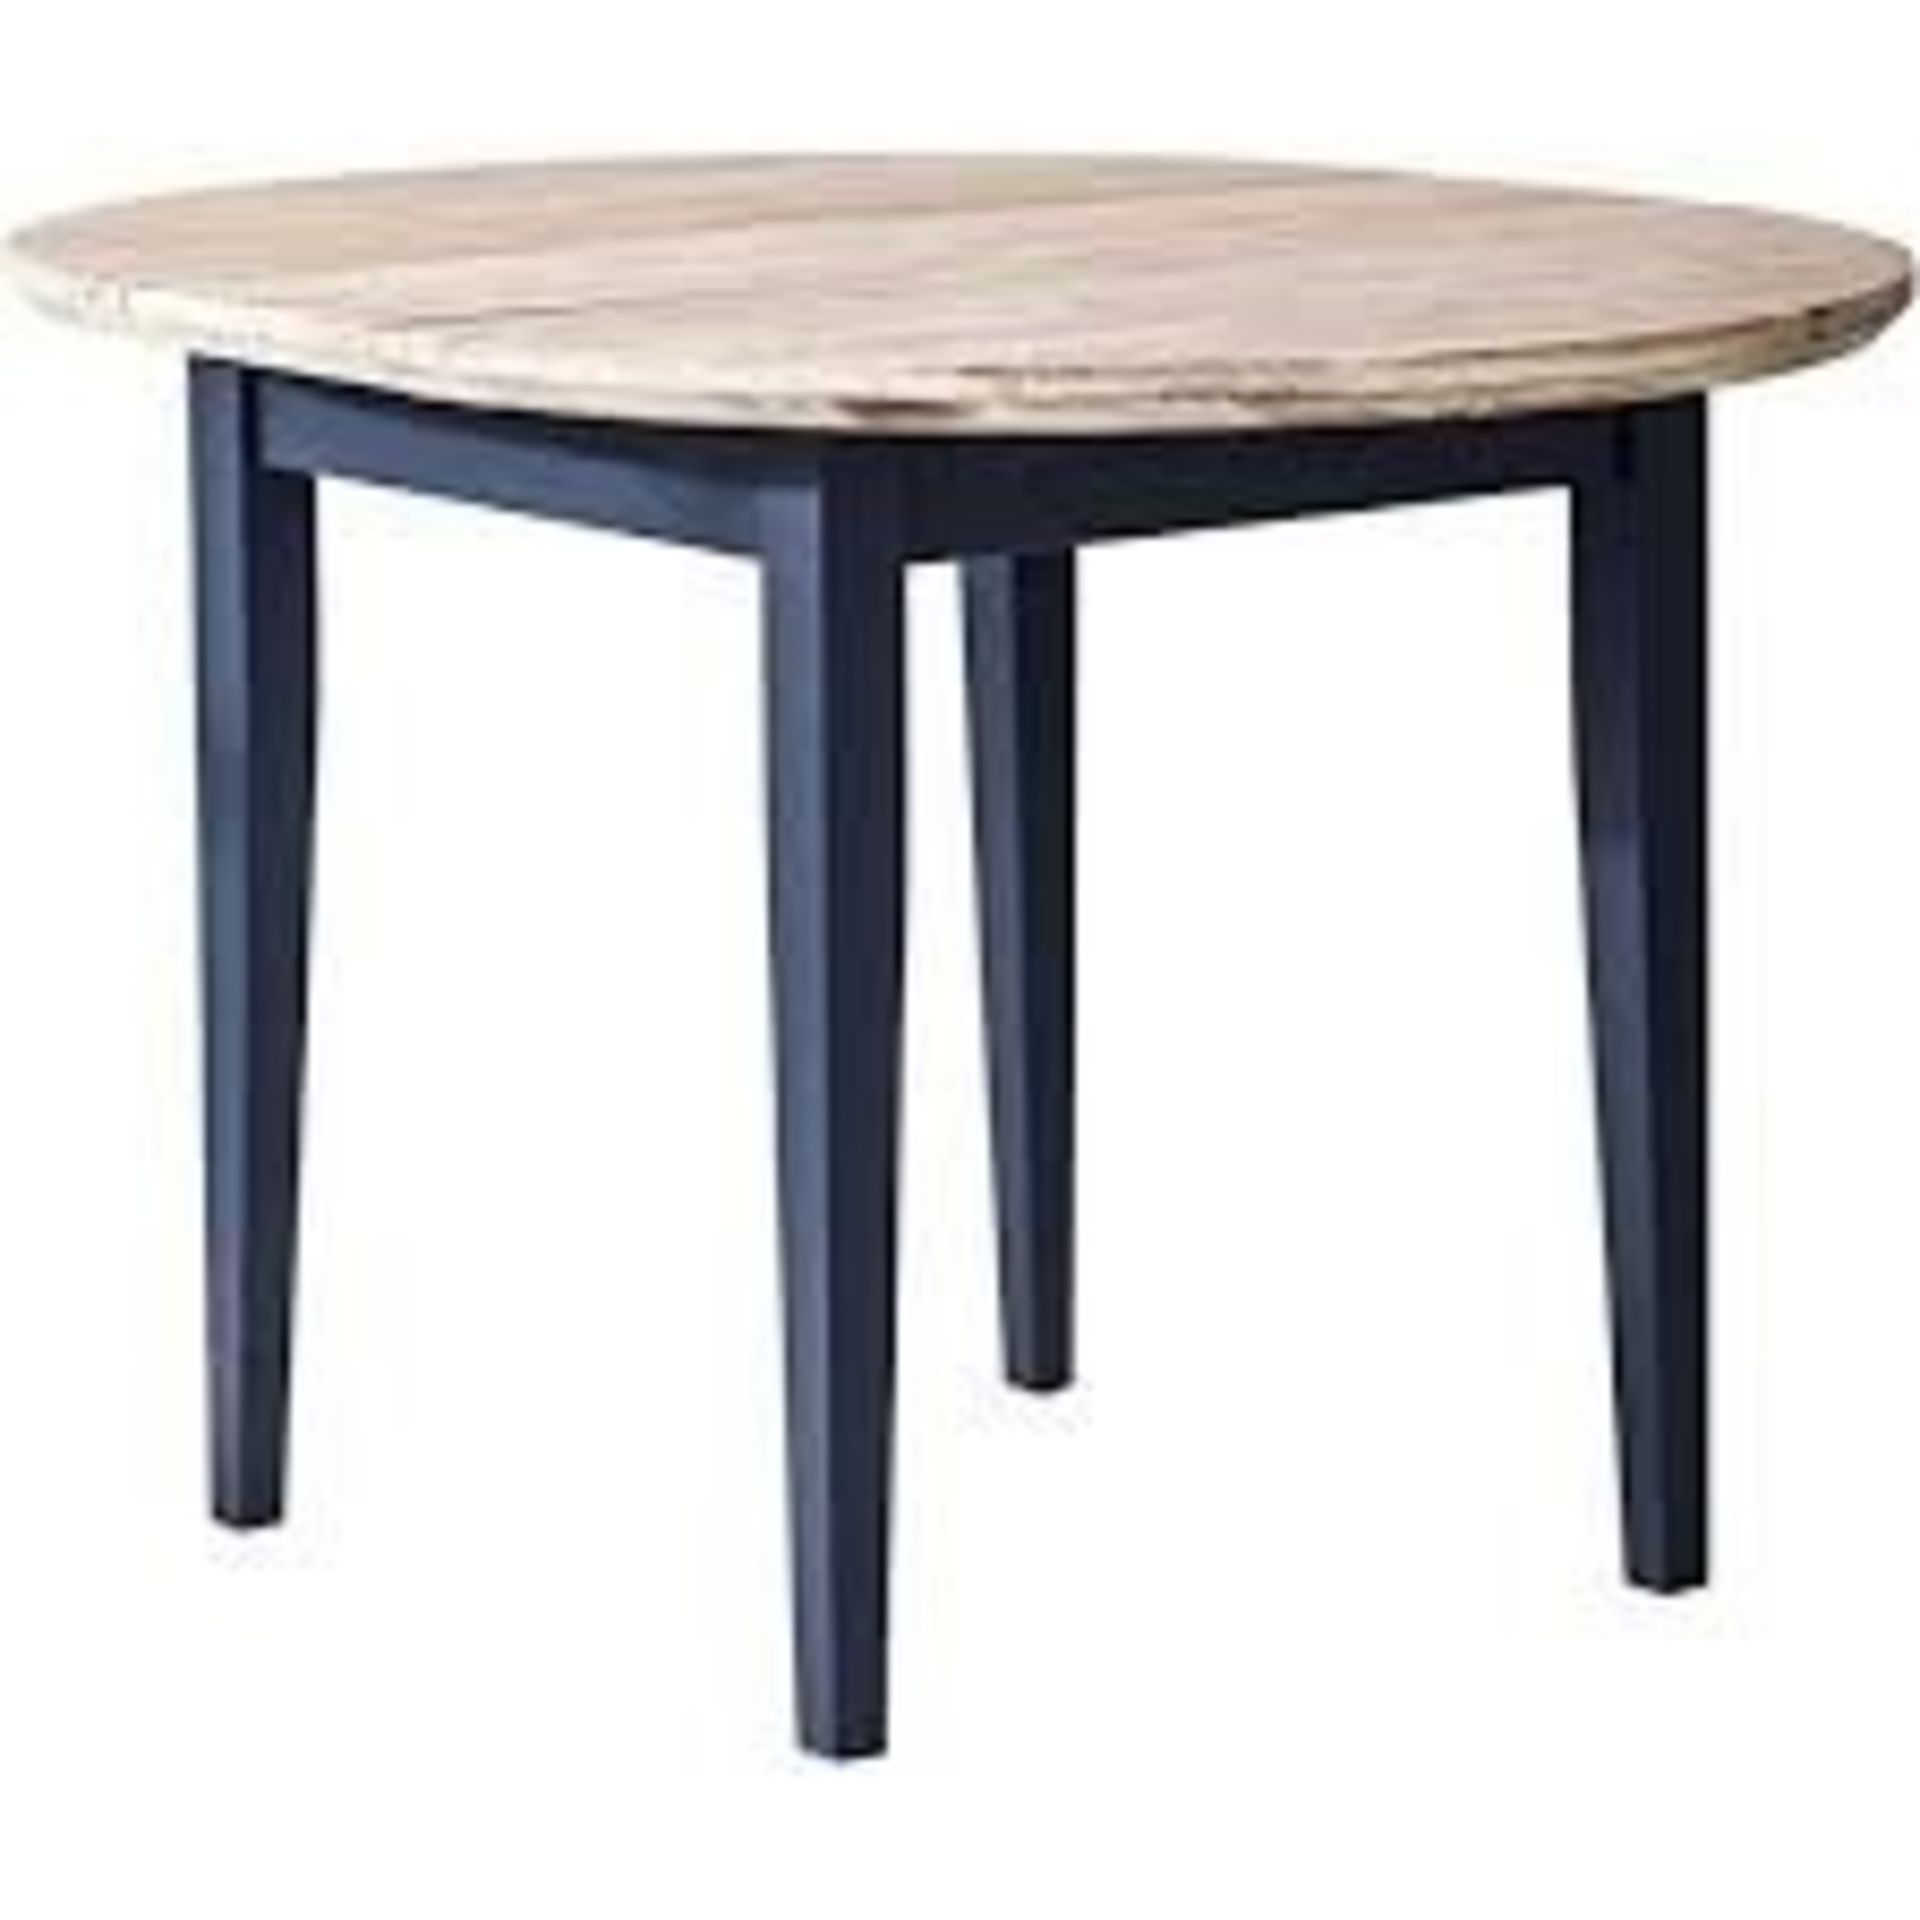 Boxed Pedeastal Table In Natural And Navy Blue RRP £300 (Images Are For Illustrations Purposes